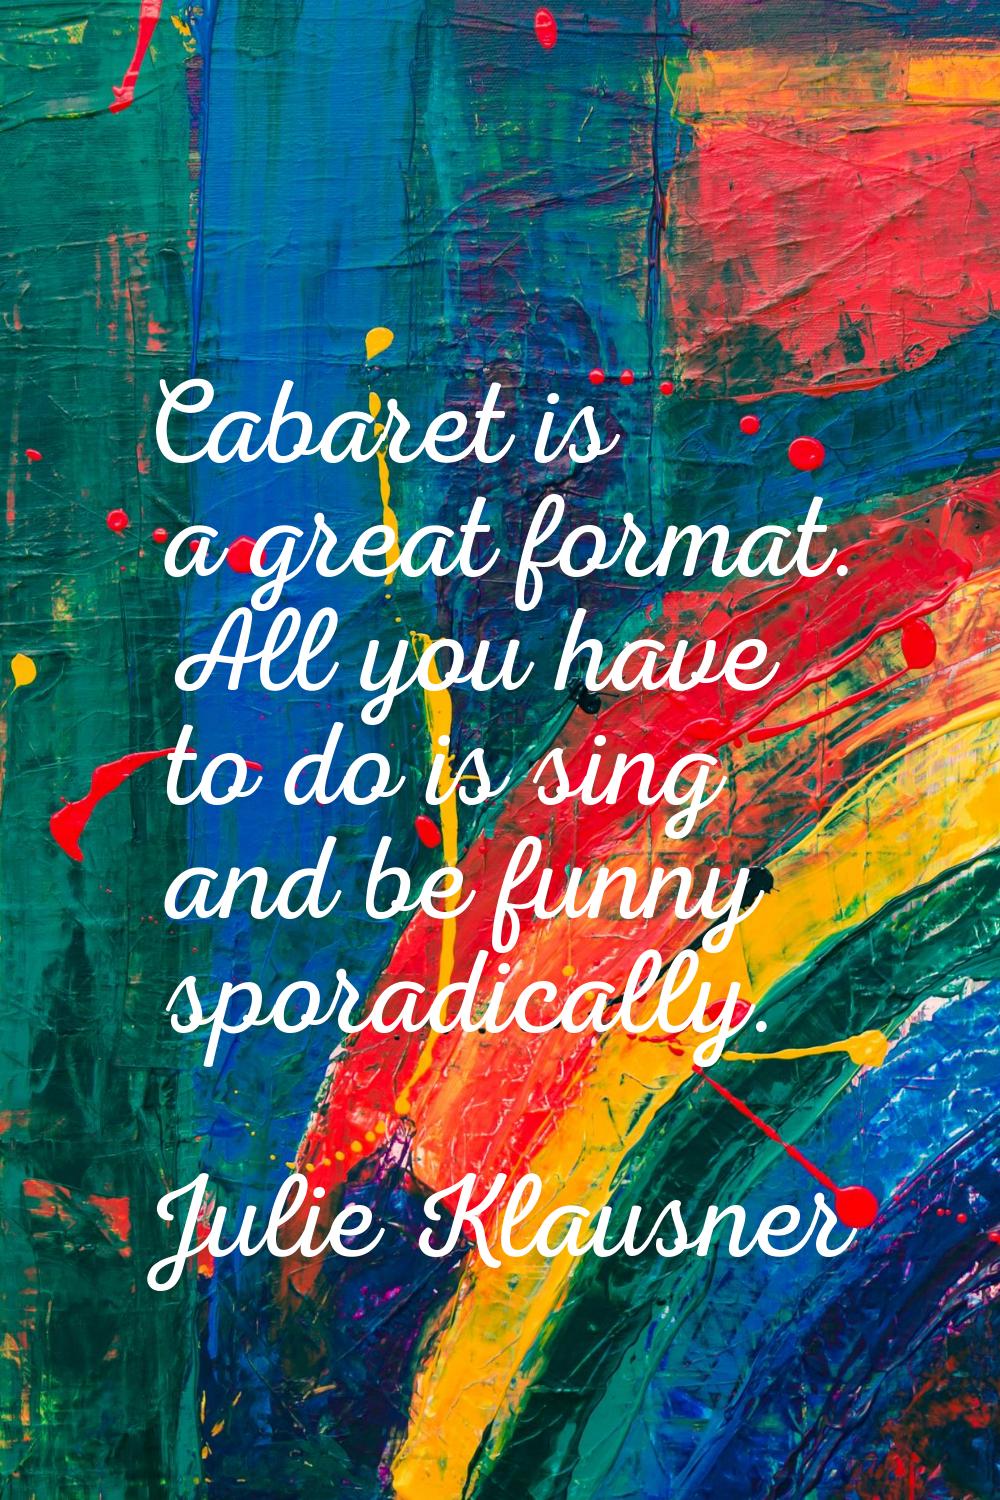 Cabaret is a great format. All you have to do is sing and be funny sporadically.